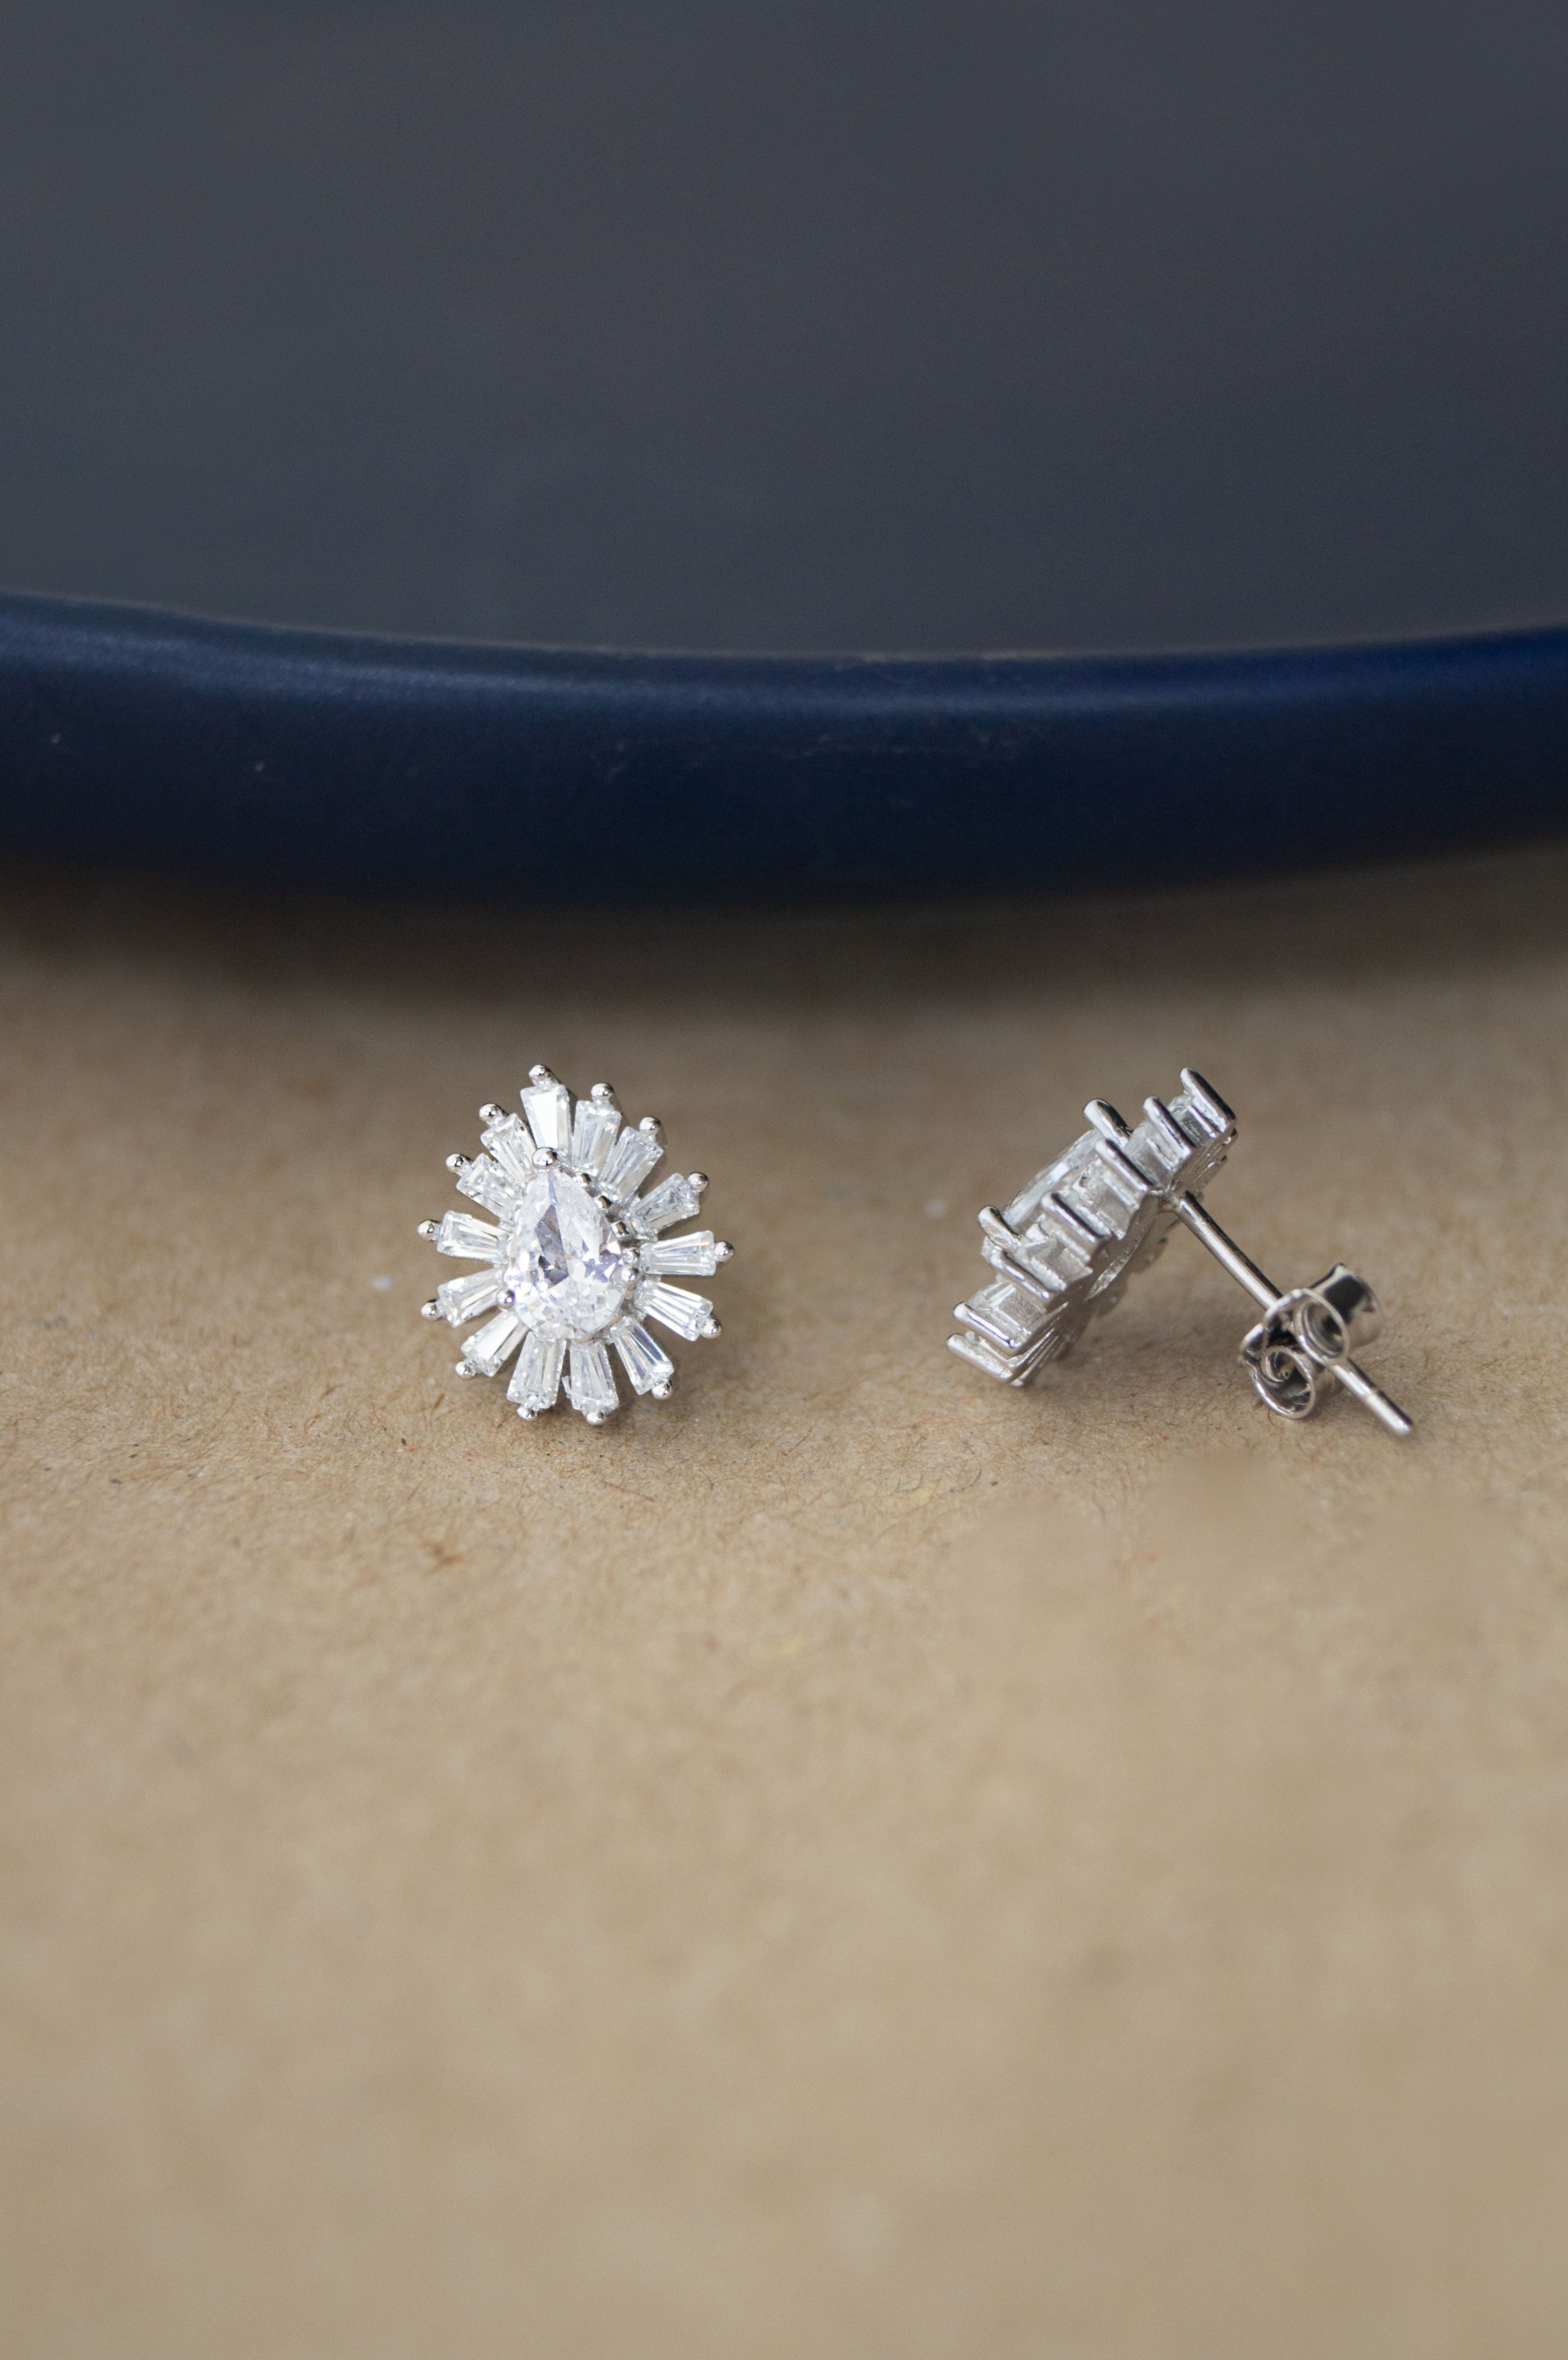 Sterling Silver Stud Earrings Set With 1 Diamond Each And Adorned With An  Interlocking Heart Filigree